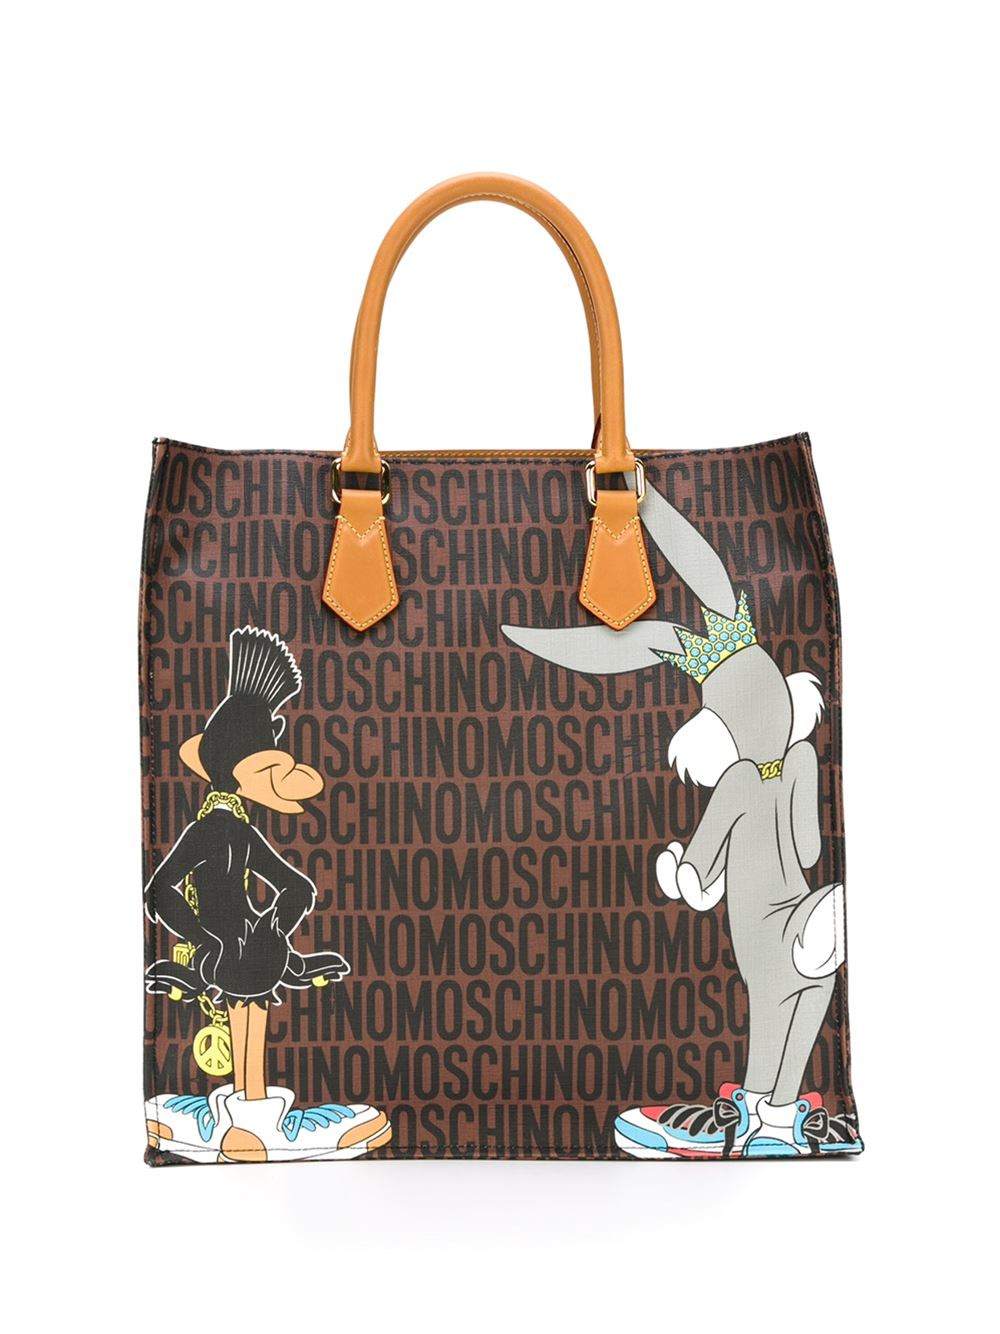 Moschino Bugs Bunny and Daffy Duck Printed Tote in Brown | Lyst